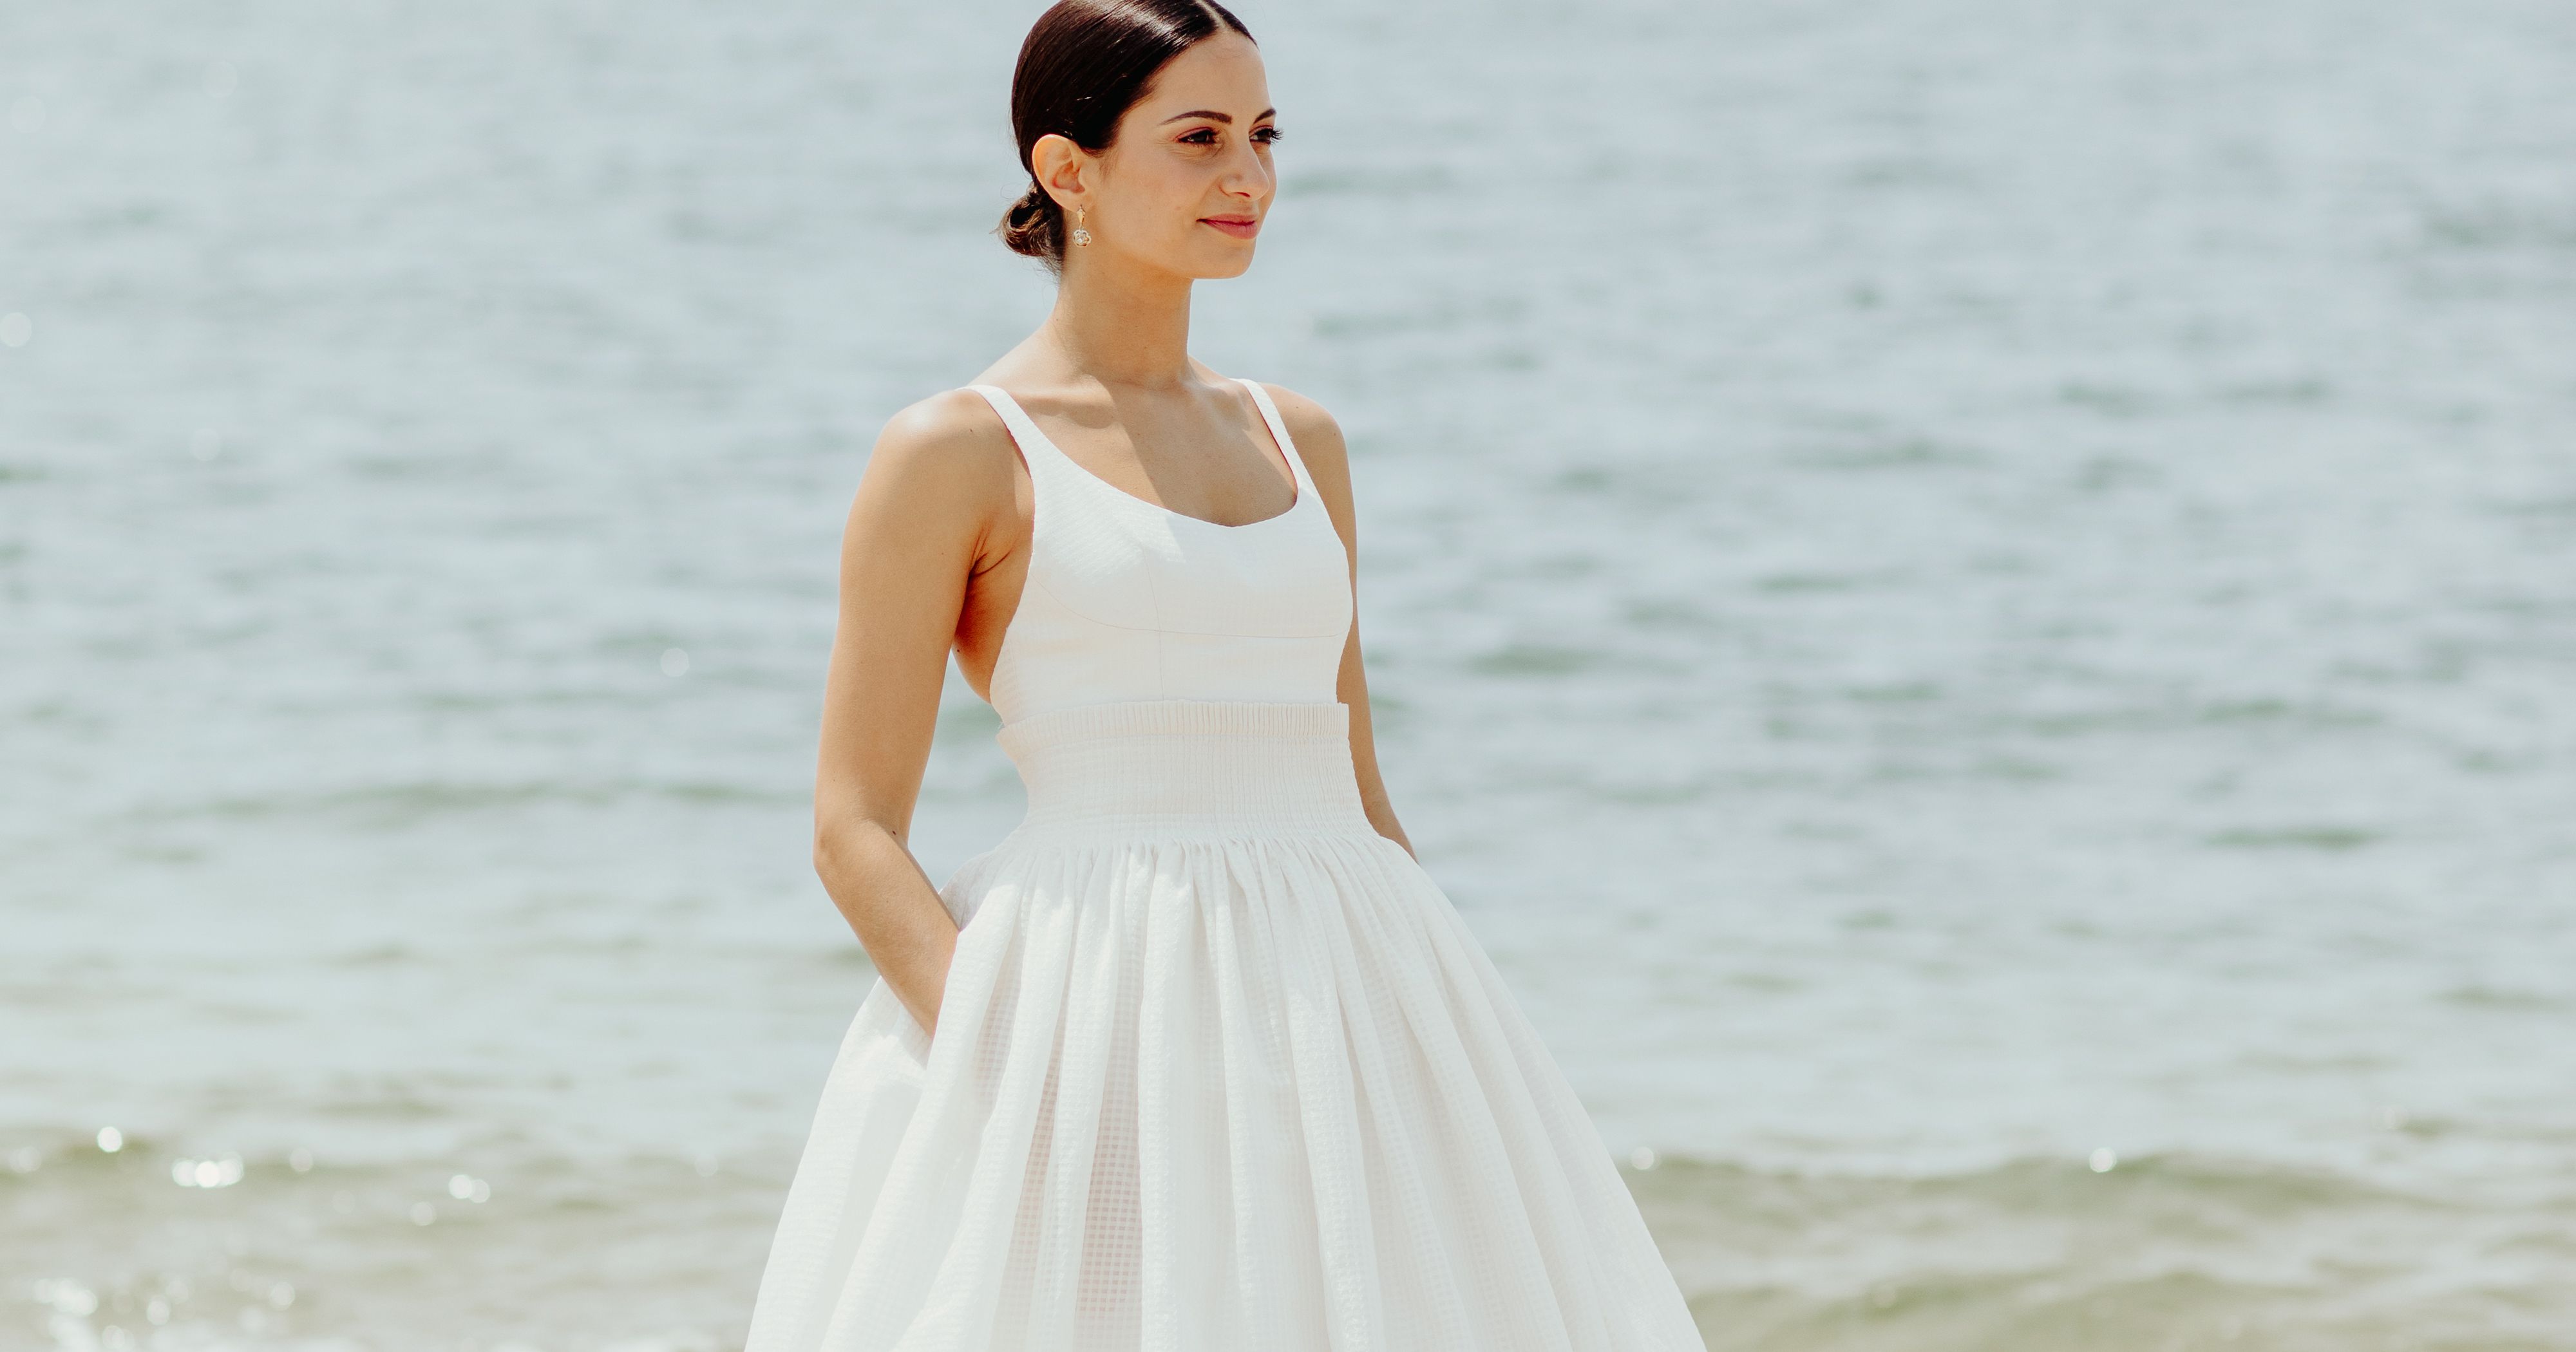 25 Stunning Summer Wedding Dresses for Every Style and Budget